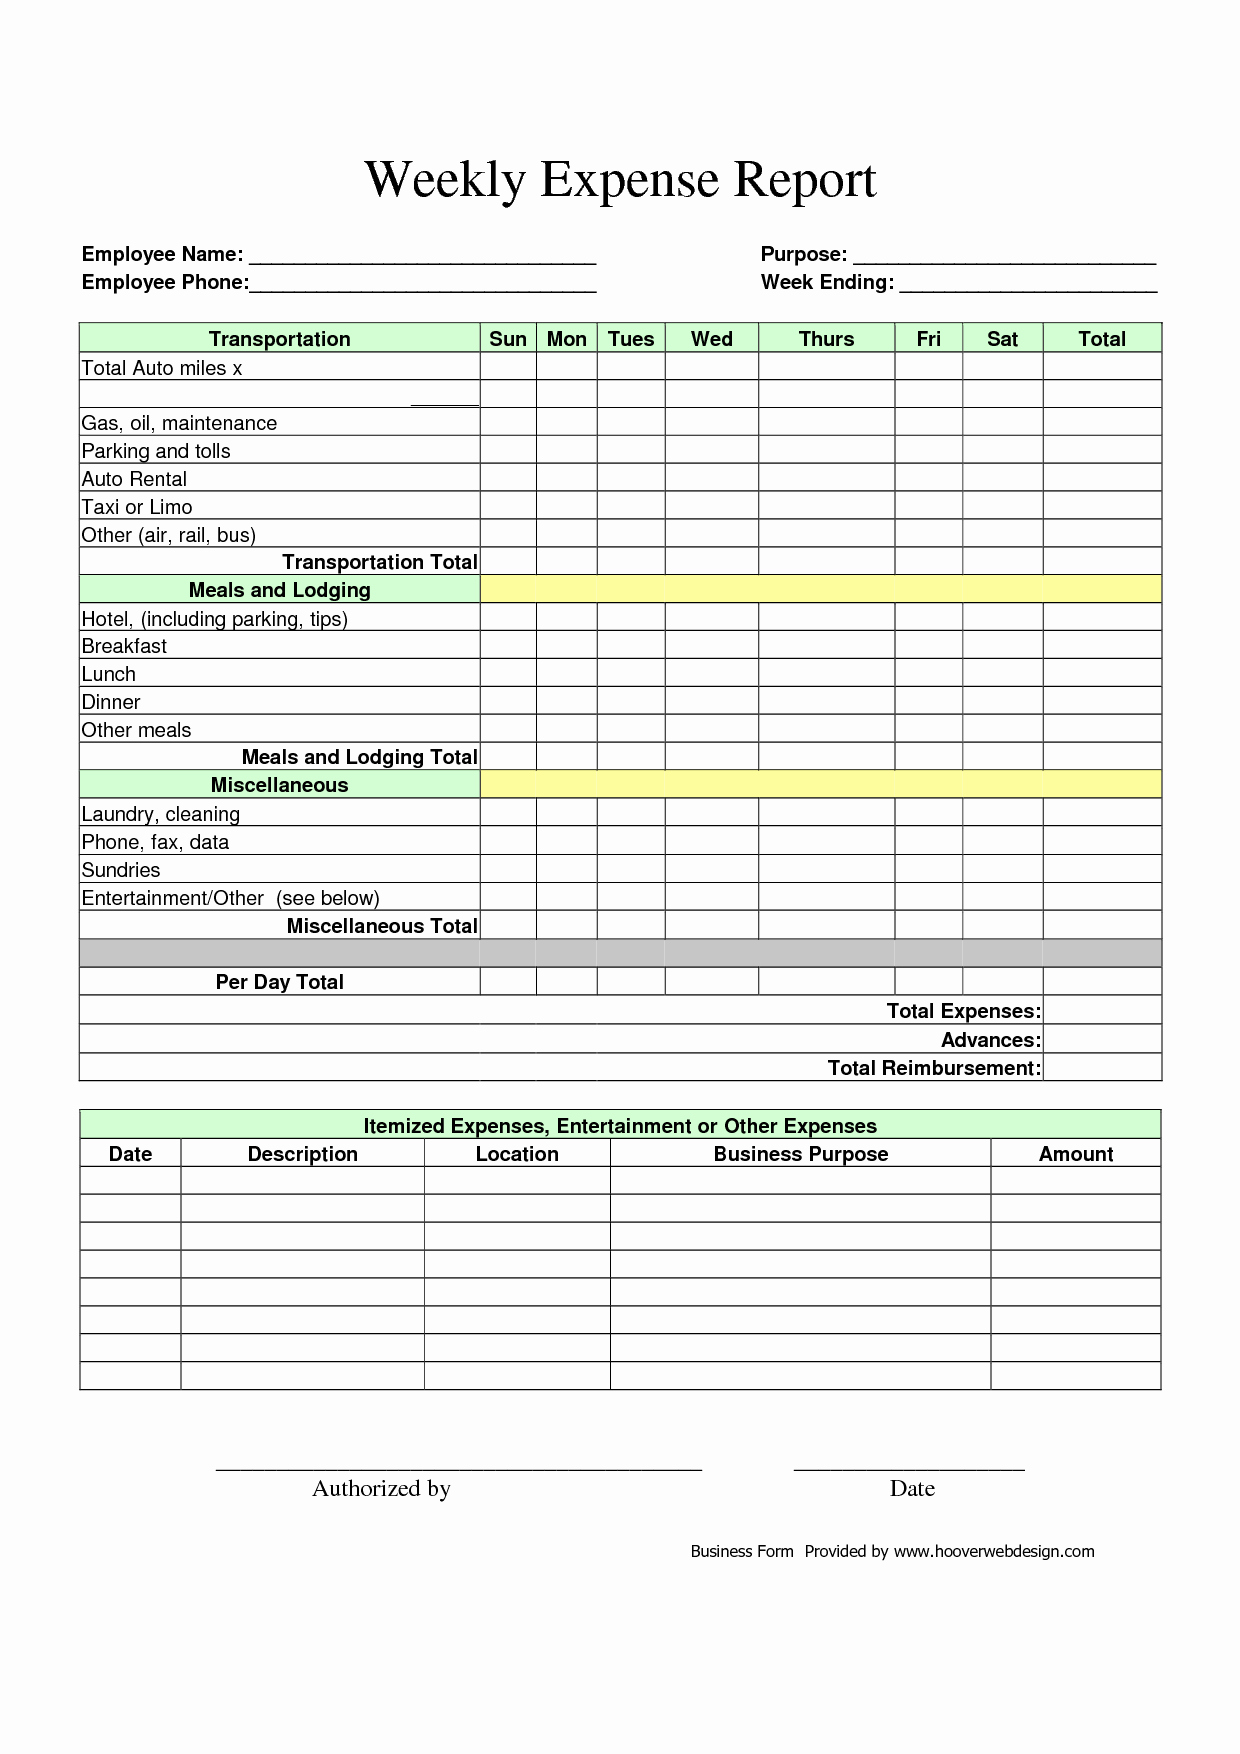 Monthly Expense Report Template Excel Fresh Blank Expense Report Portablegasgrillweber